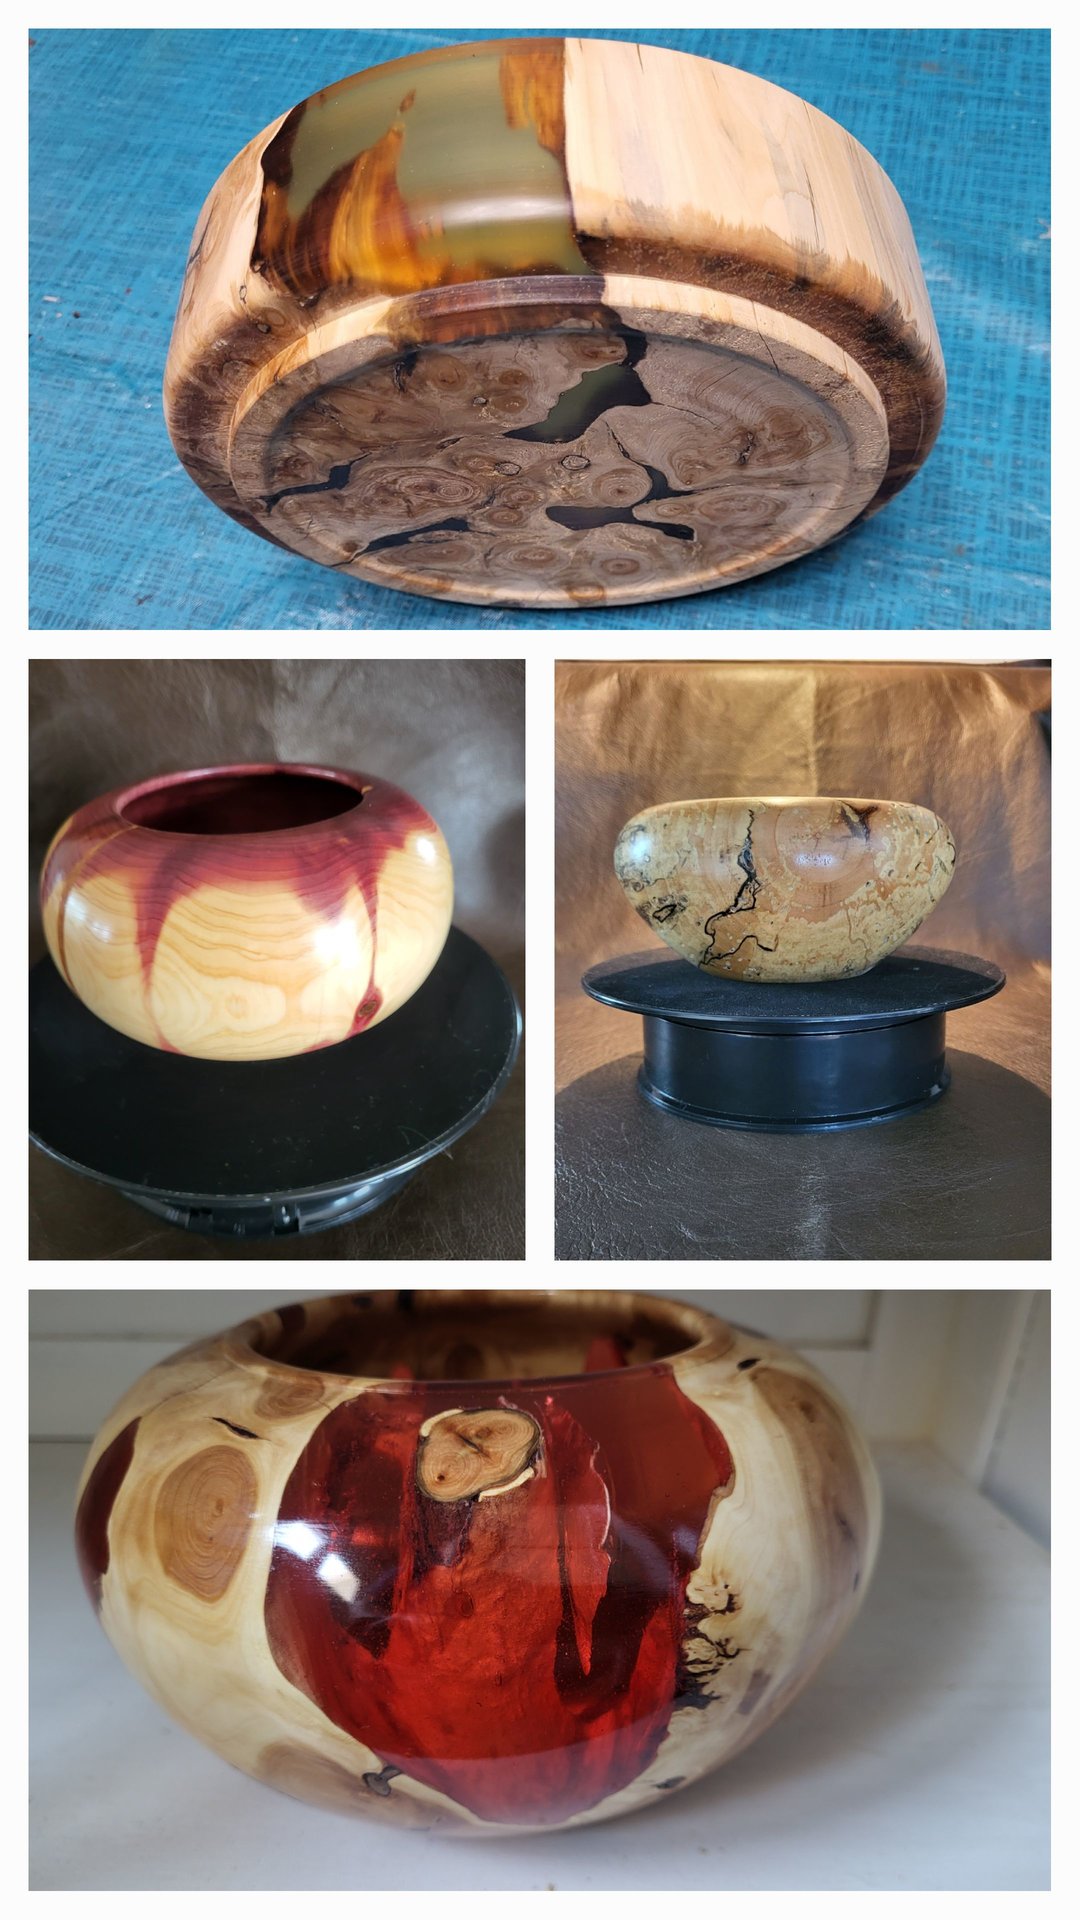 Some of my favorite bowls to date